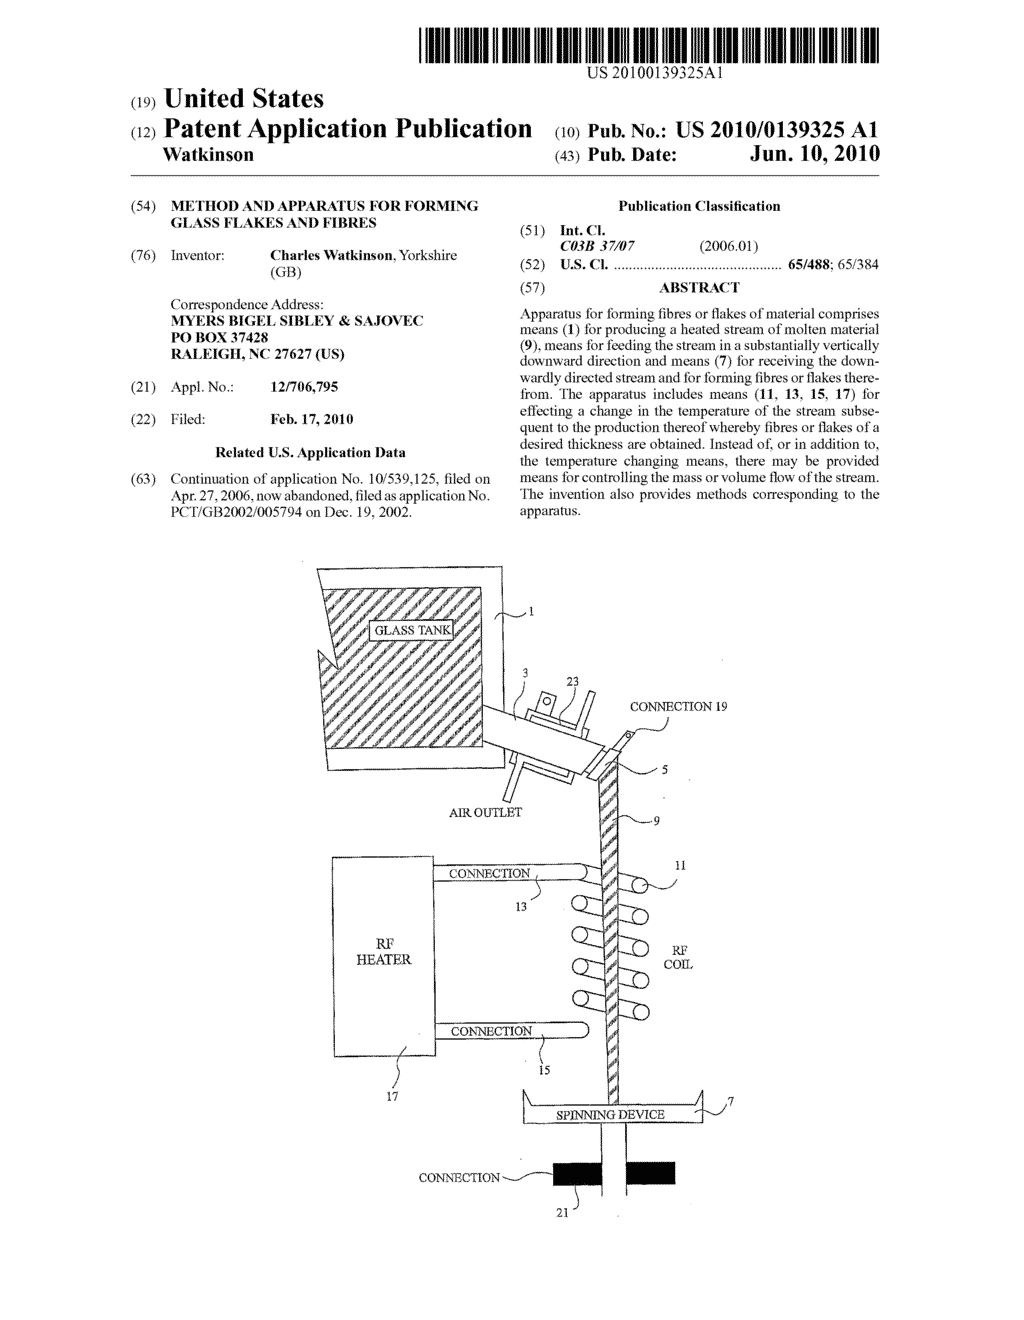 Method and Apparatus for Forming Glass Flakes and Fibres - diagram, schematic, and image 01